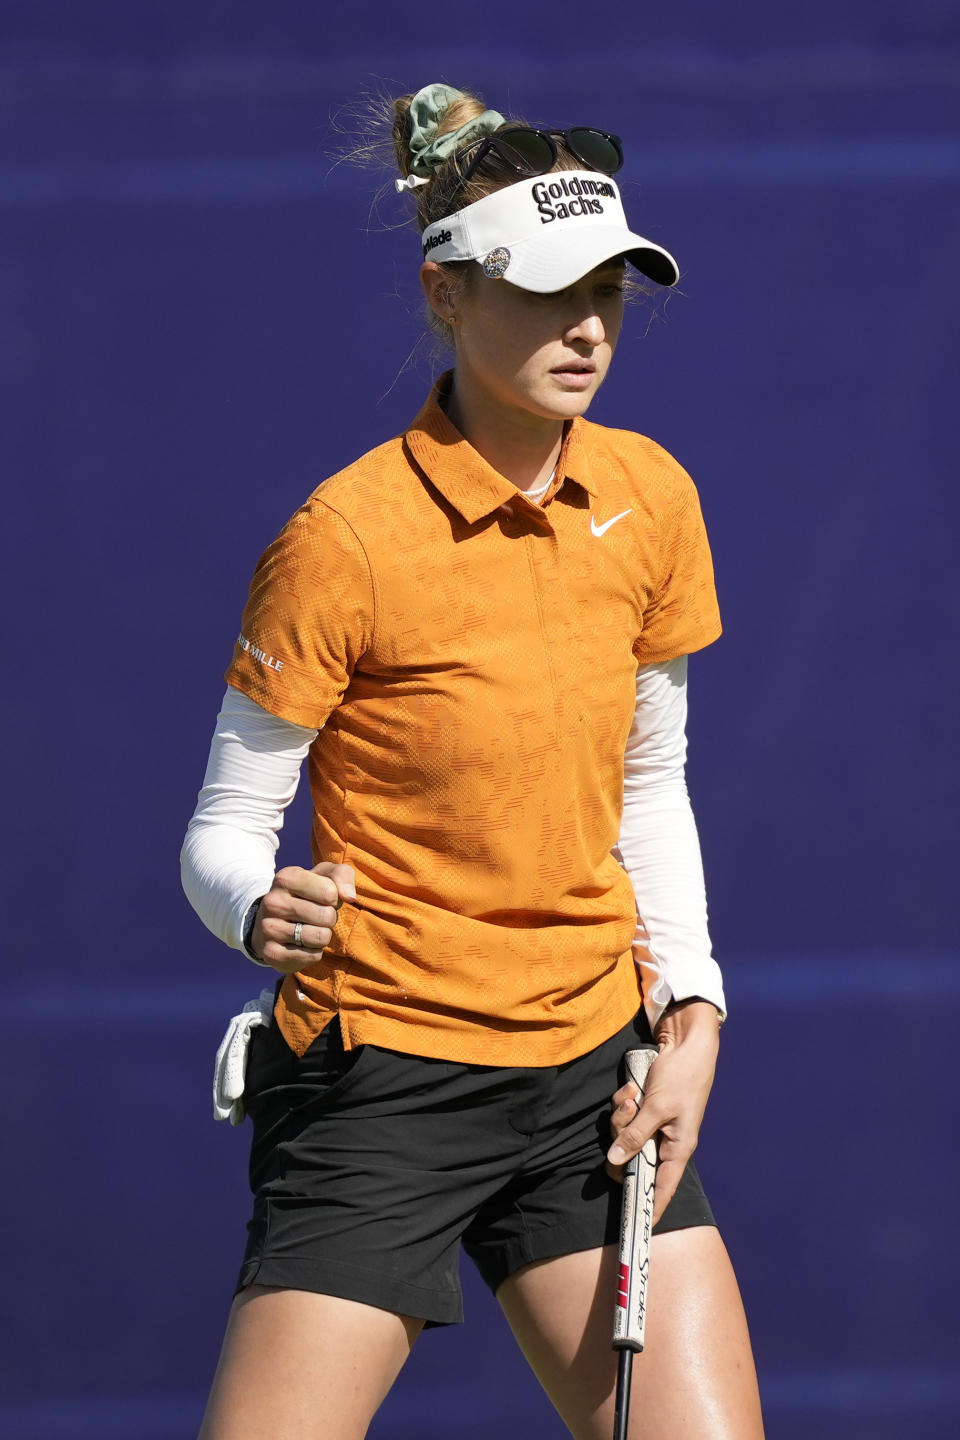 Nelly Korda celebrates after a birdie on the 18th hole during the third round of the Chevron Championship women's golf tournament at The Club at Carlton Woods on Saturday, April 22, 2023, in The Woodlands, Texas. (AP Photo/David J. Phillip)